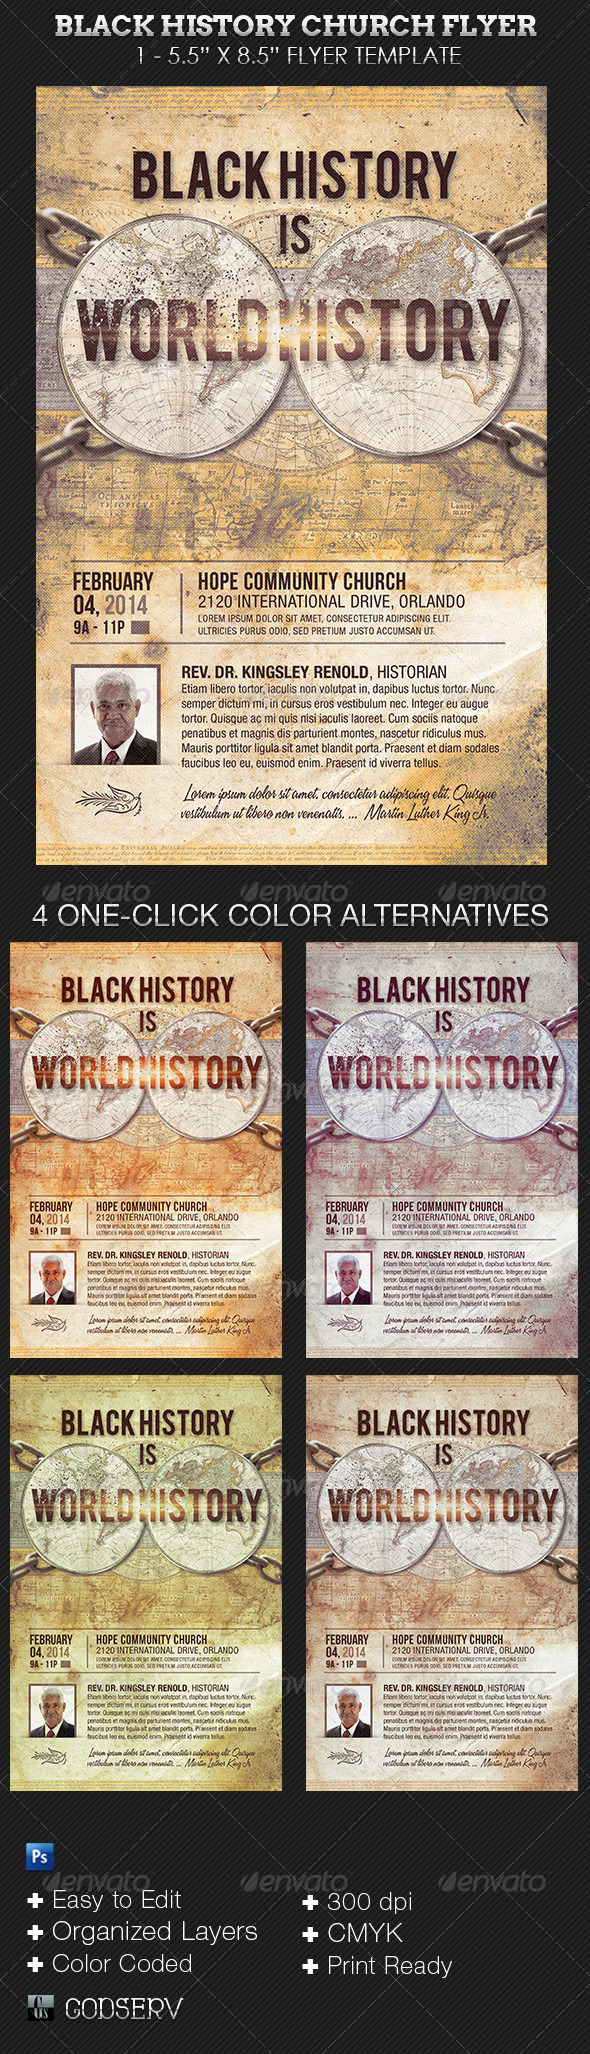 Black-HIstory-Church-Flyer-Template-Preview